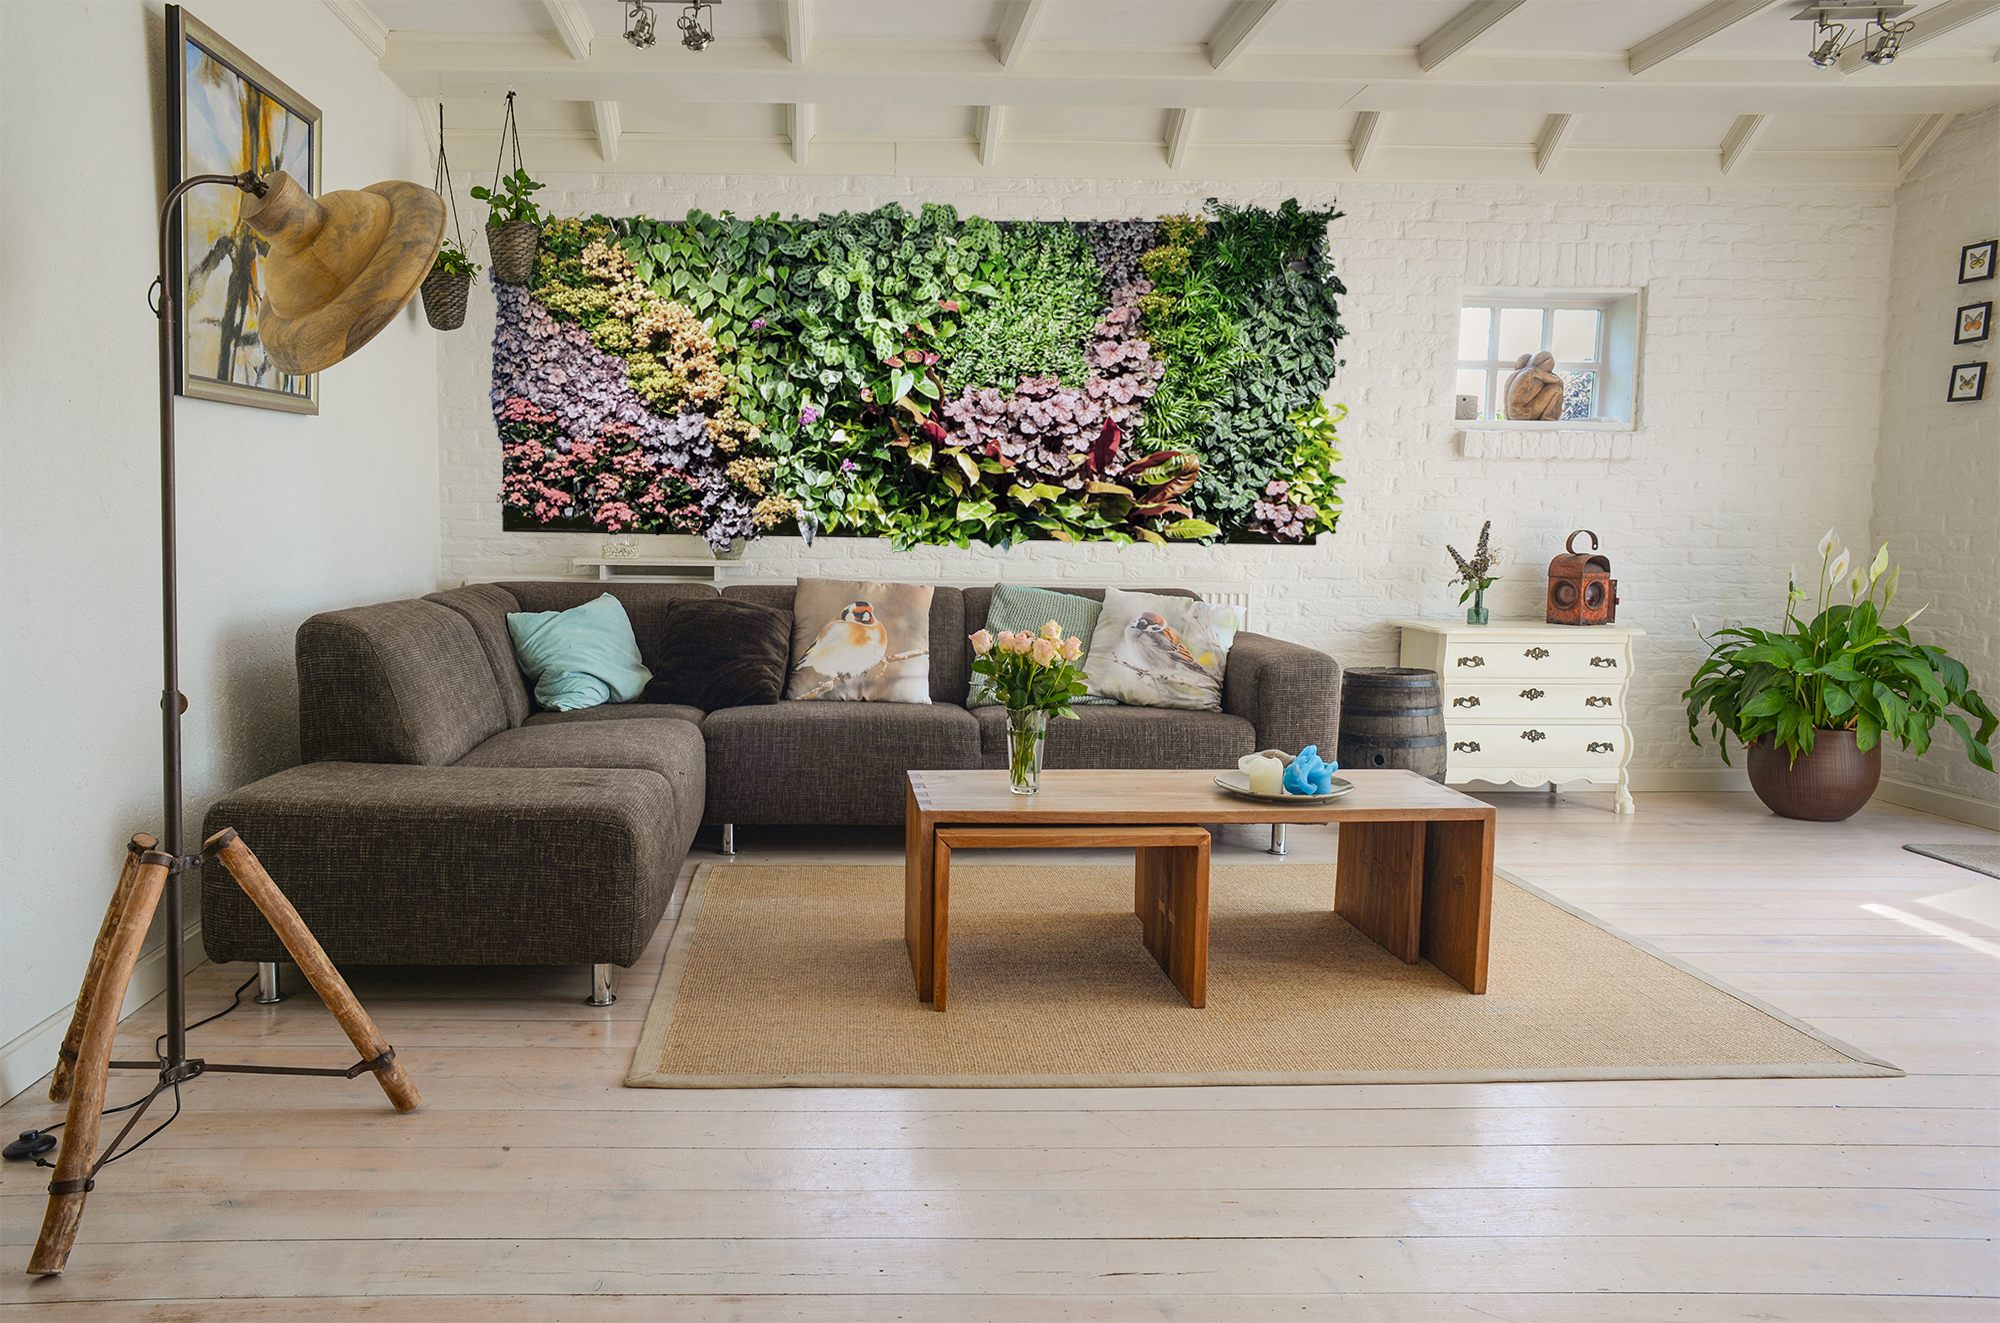 Include some color in your living wall art to brighten up the room.